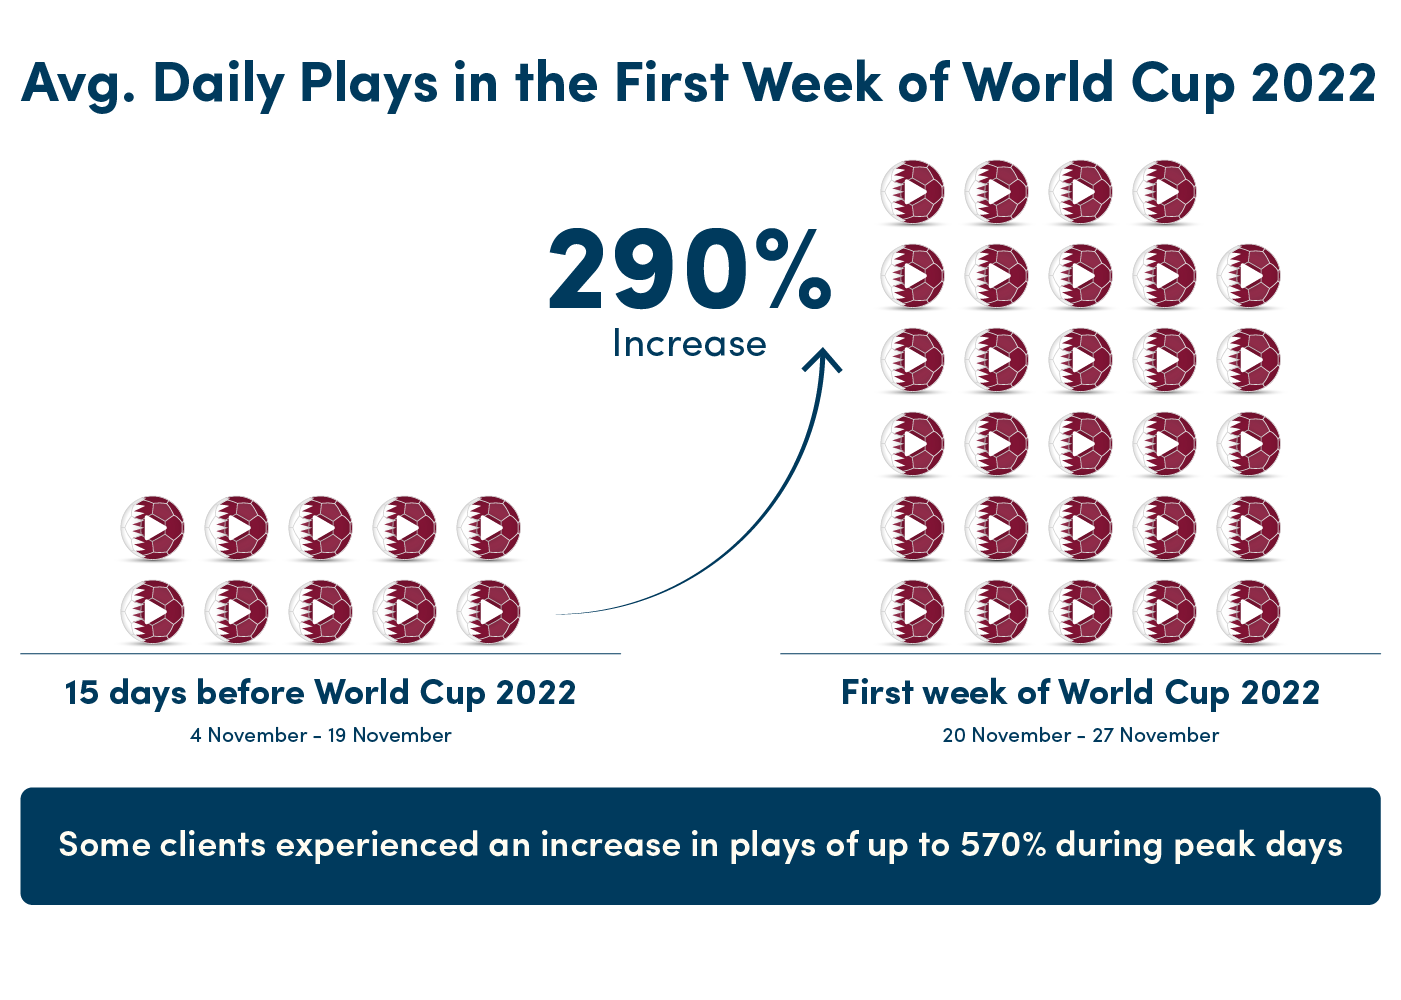 Avd Daily Plays in the first week of the World Cup 2022 from NPAW data